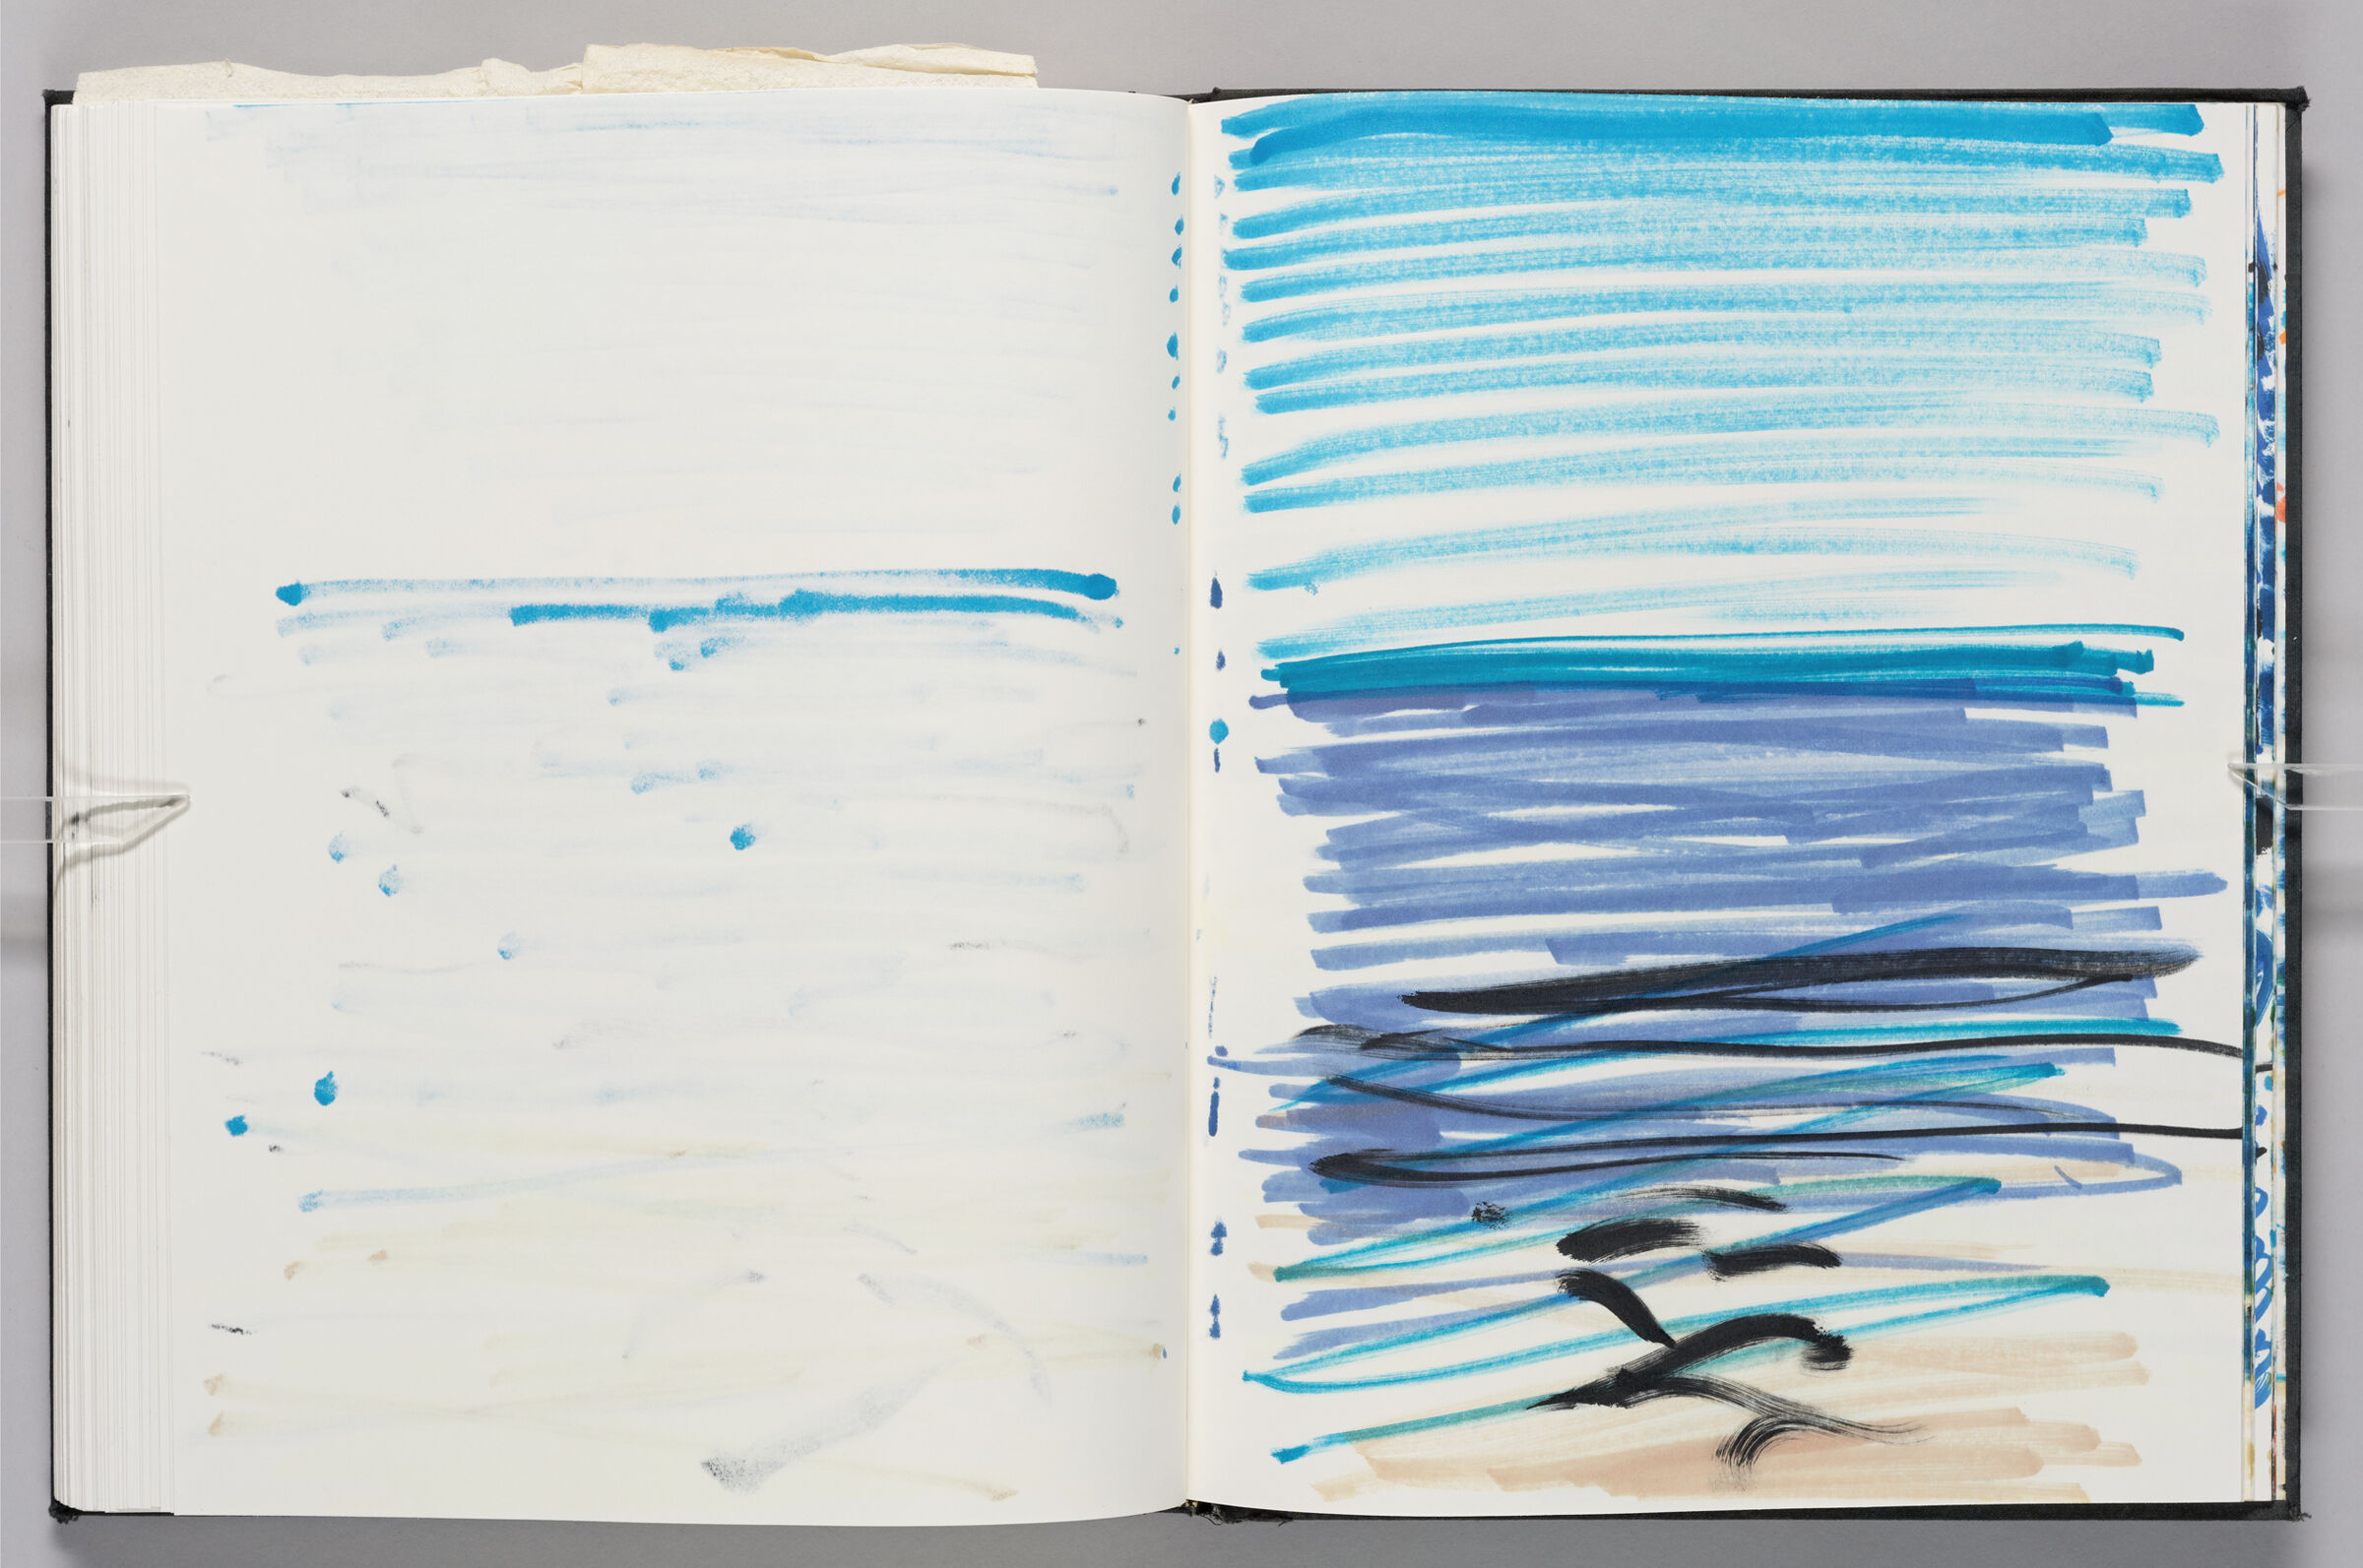 Untitled (Bleed-Through Of Previous Page, Left Page); Untitled (Beach Scene, Right Page)